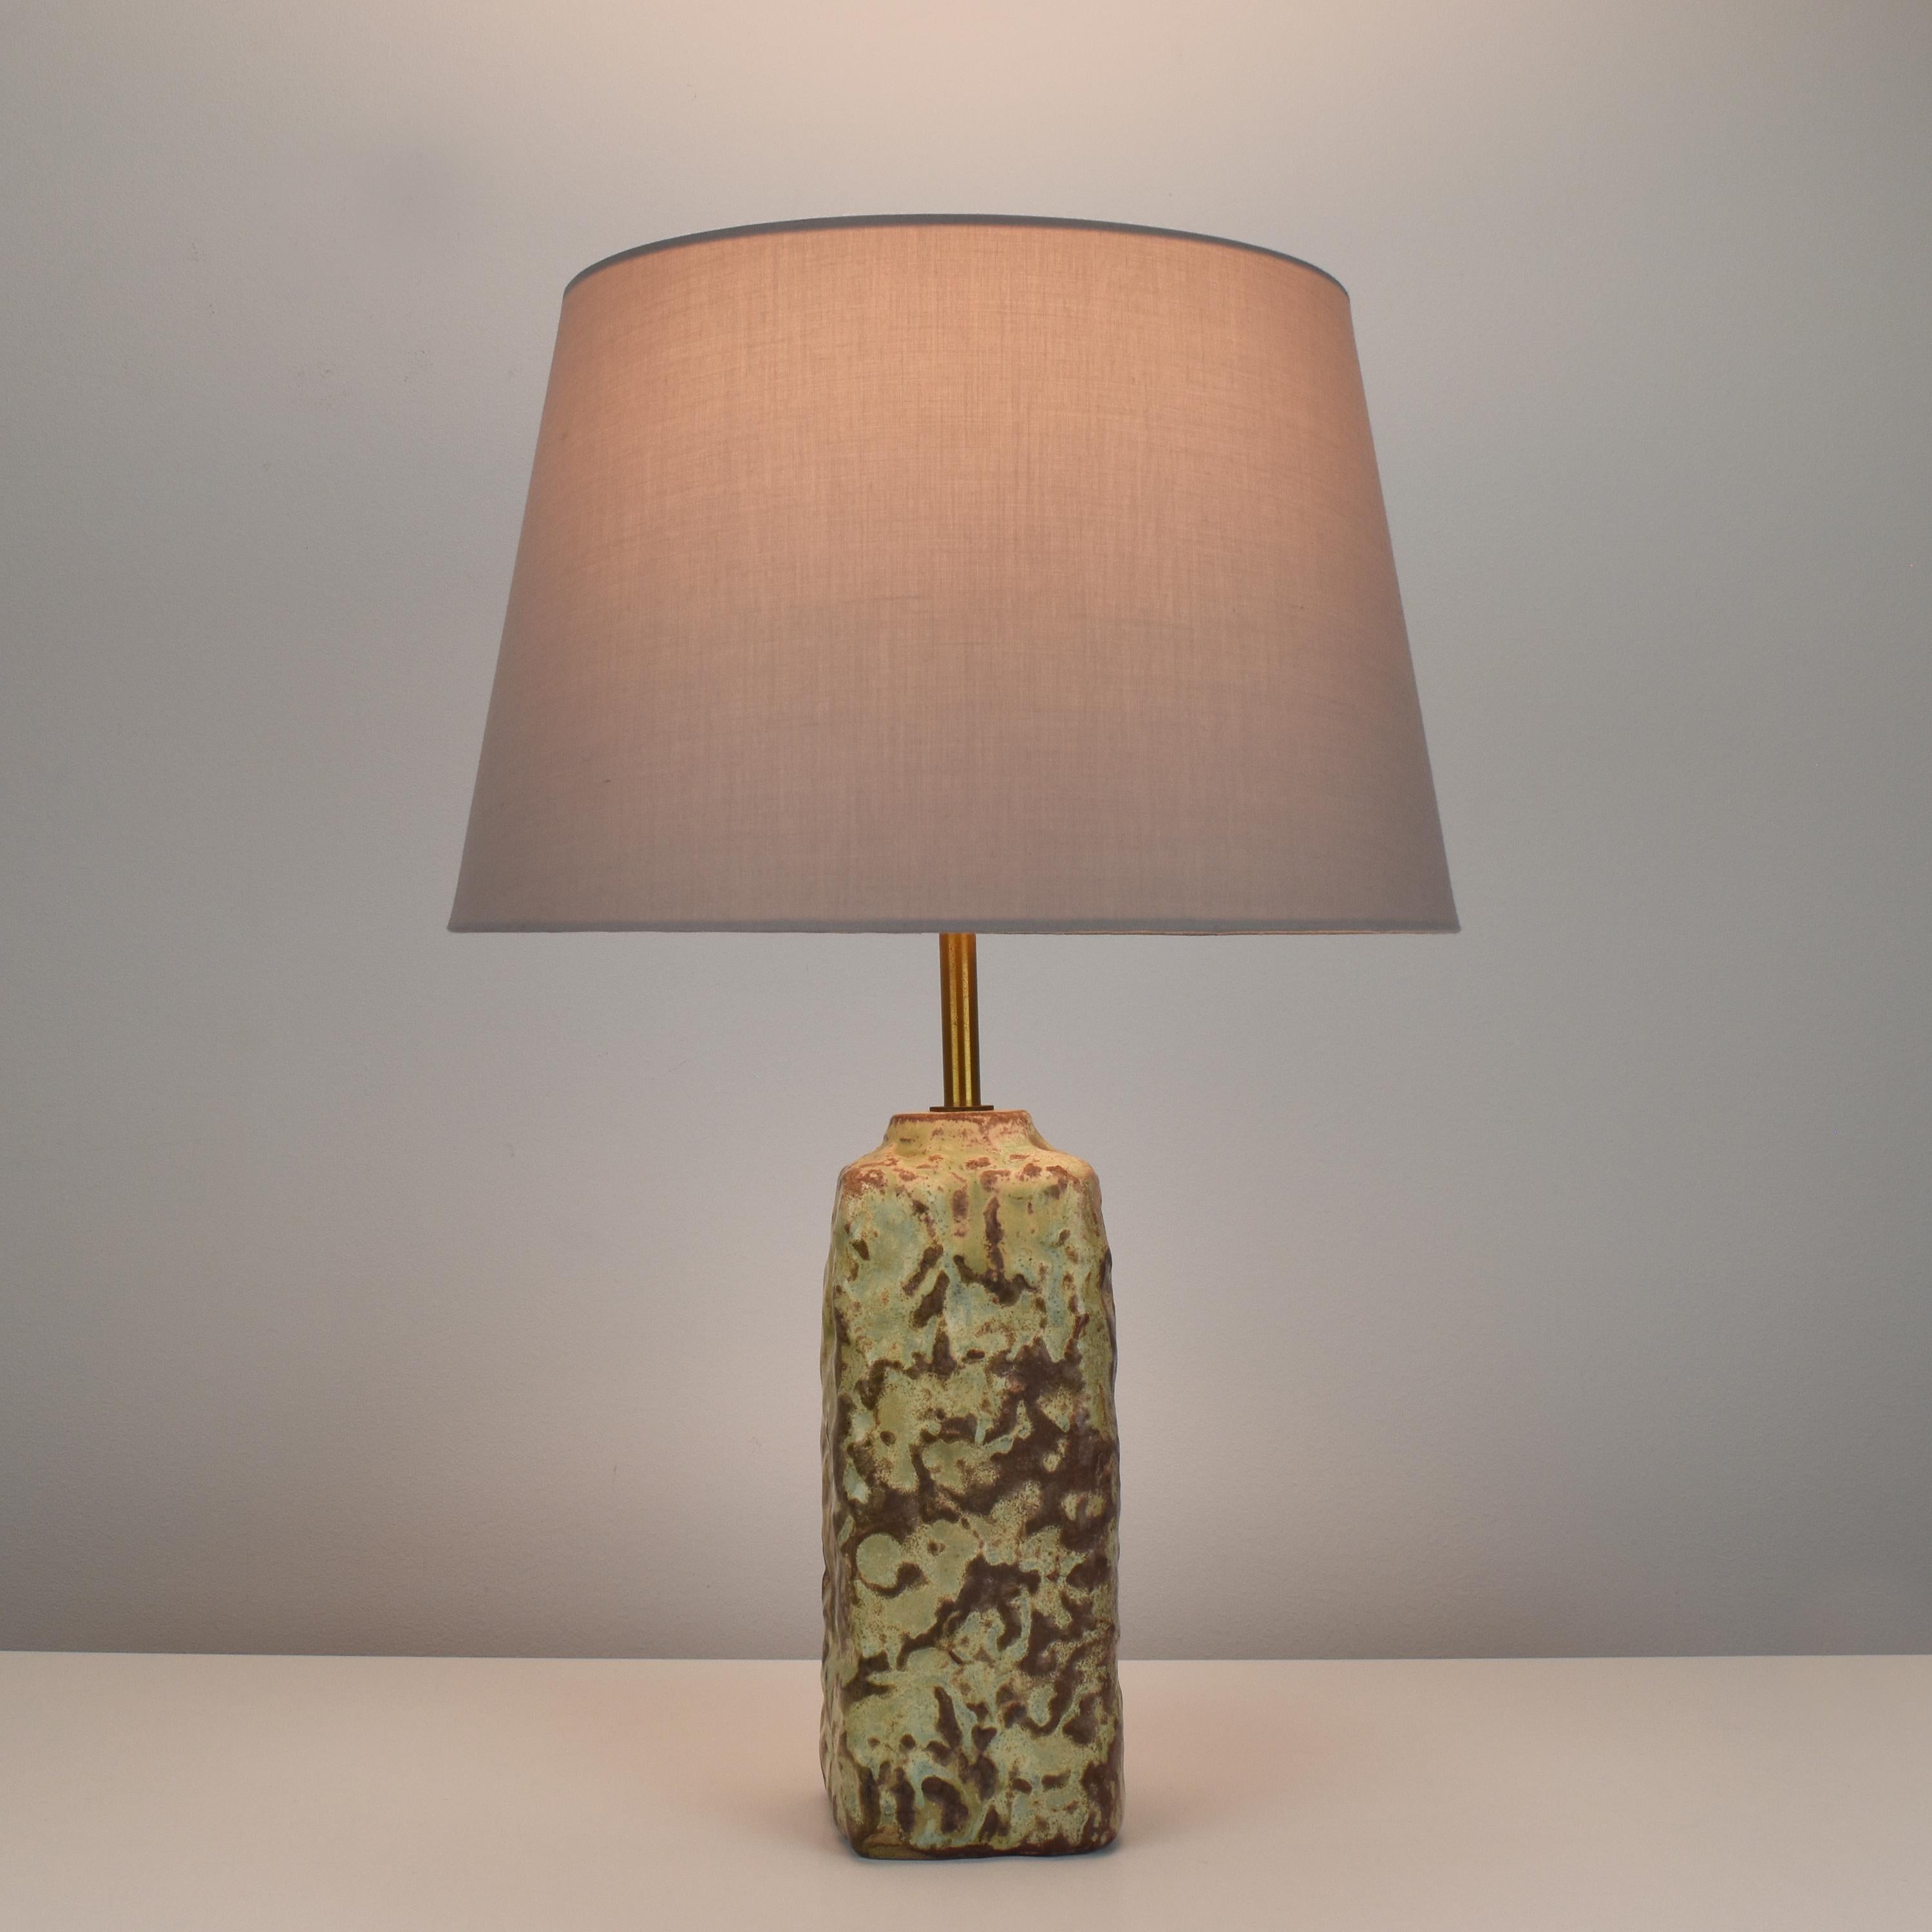 Hand-Crafted Mobach Ceramic Table Lamp Vintage Textured Studio Pottery Axel Salto Style For Sale